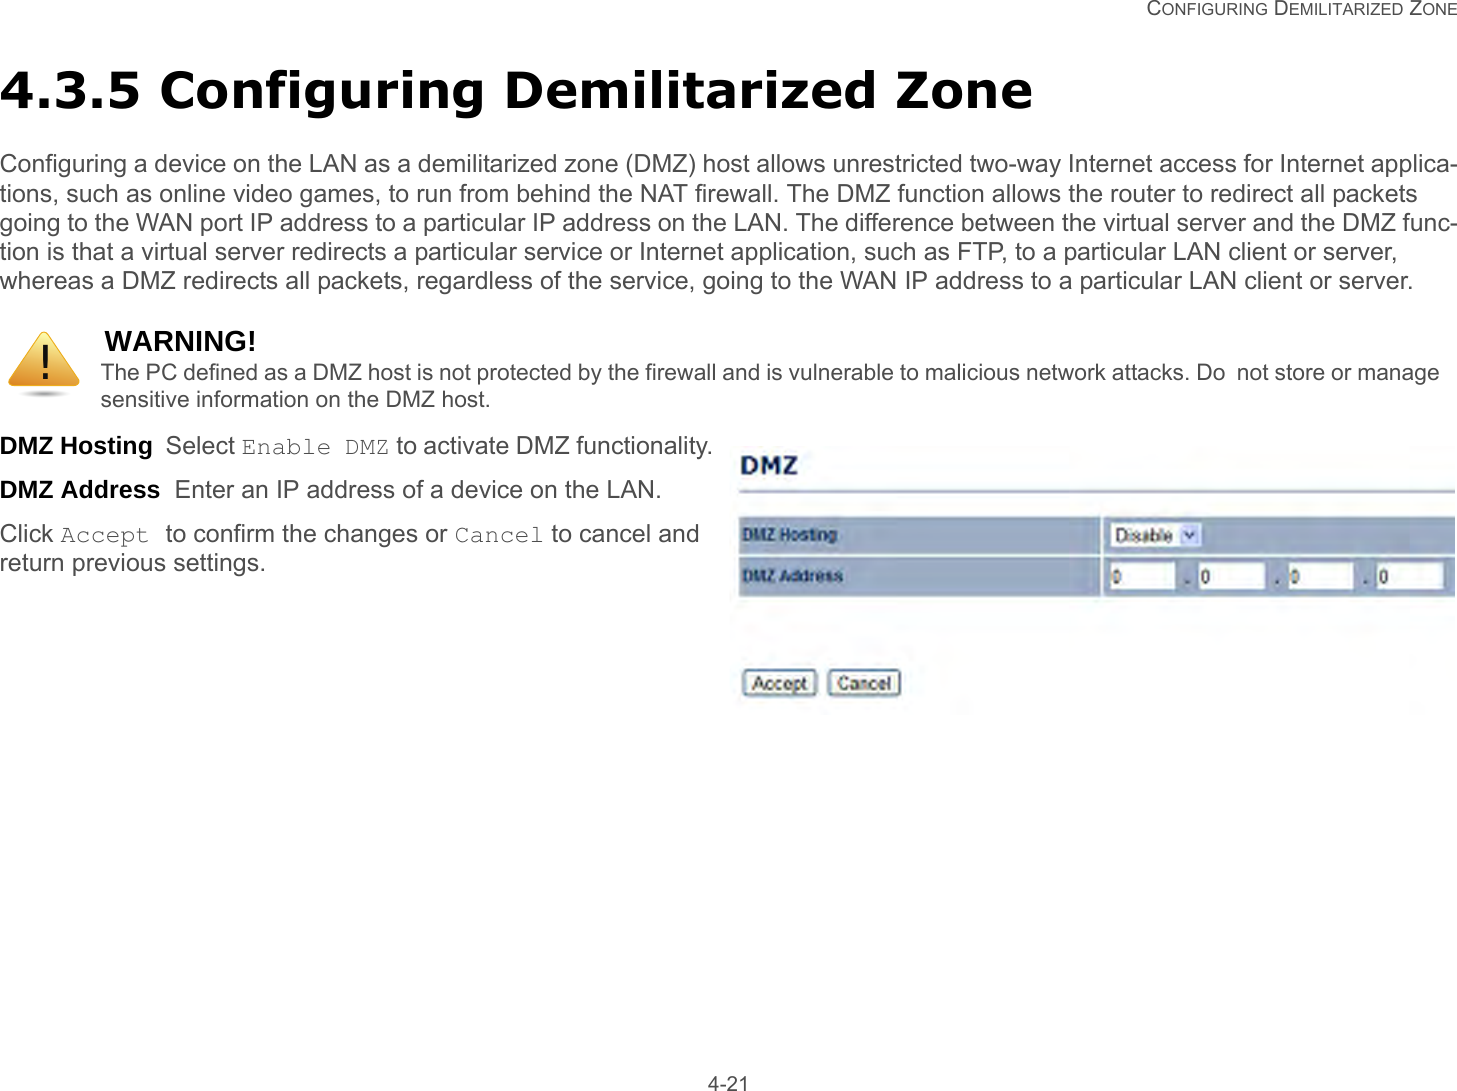   CONFIGURING DEMILITARIZED ZONE 4-214.3.5 Configuring Demilitarized ZoneConfiguring a device on the LAN as a demilitarized zone (DMZ) host allows unrestricted two-way Internet access for Internet applica-tions, such as online video games, to run from behind the NAT firewall. The DMZ function allows the router to redirect all packets going to the WAN port IP address to a particular IP address on the LAN. The difference between the virtual server and the DMZ func-tion is that a virtual server redirects a particular service or Internet application, such as FTP, to a particular LAN client or server, whereas a DMZ redirects all packets, regardless of the service, going to the WAN IP address to a particular LAN client or server.DMZ Hosting  Select Enable DMZ to activate DMZ functionality.DMZ Address  Enter an IP address of a device on the LAN.Click Accept to confirm the changes or Cancel to cancel and return previous settings.WARNING!The PC defined as a DMZ host is not protected by the firewall and is vulnerable to malicious network attacks. Do  not store or manage sensitive information on the DMZ host.!